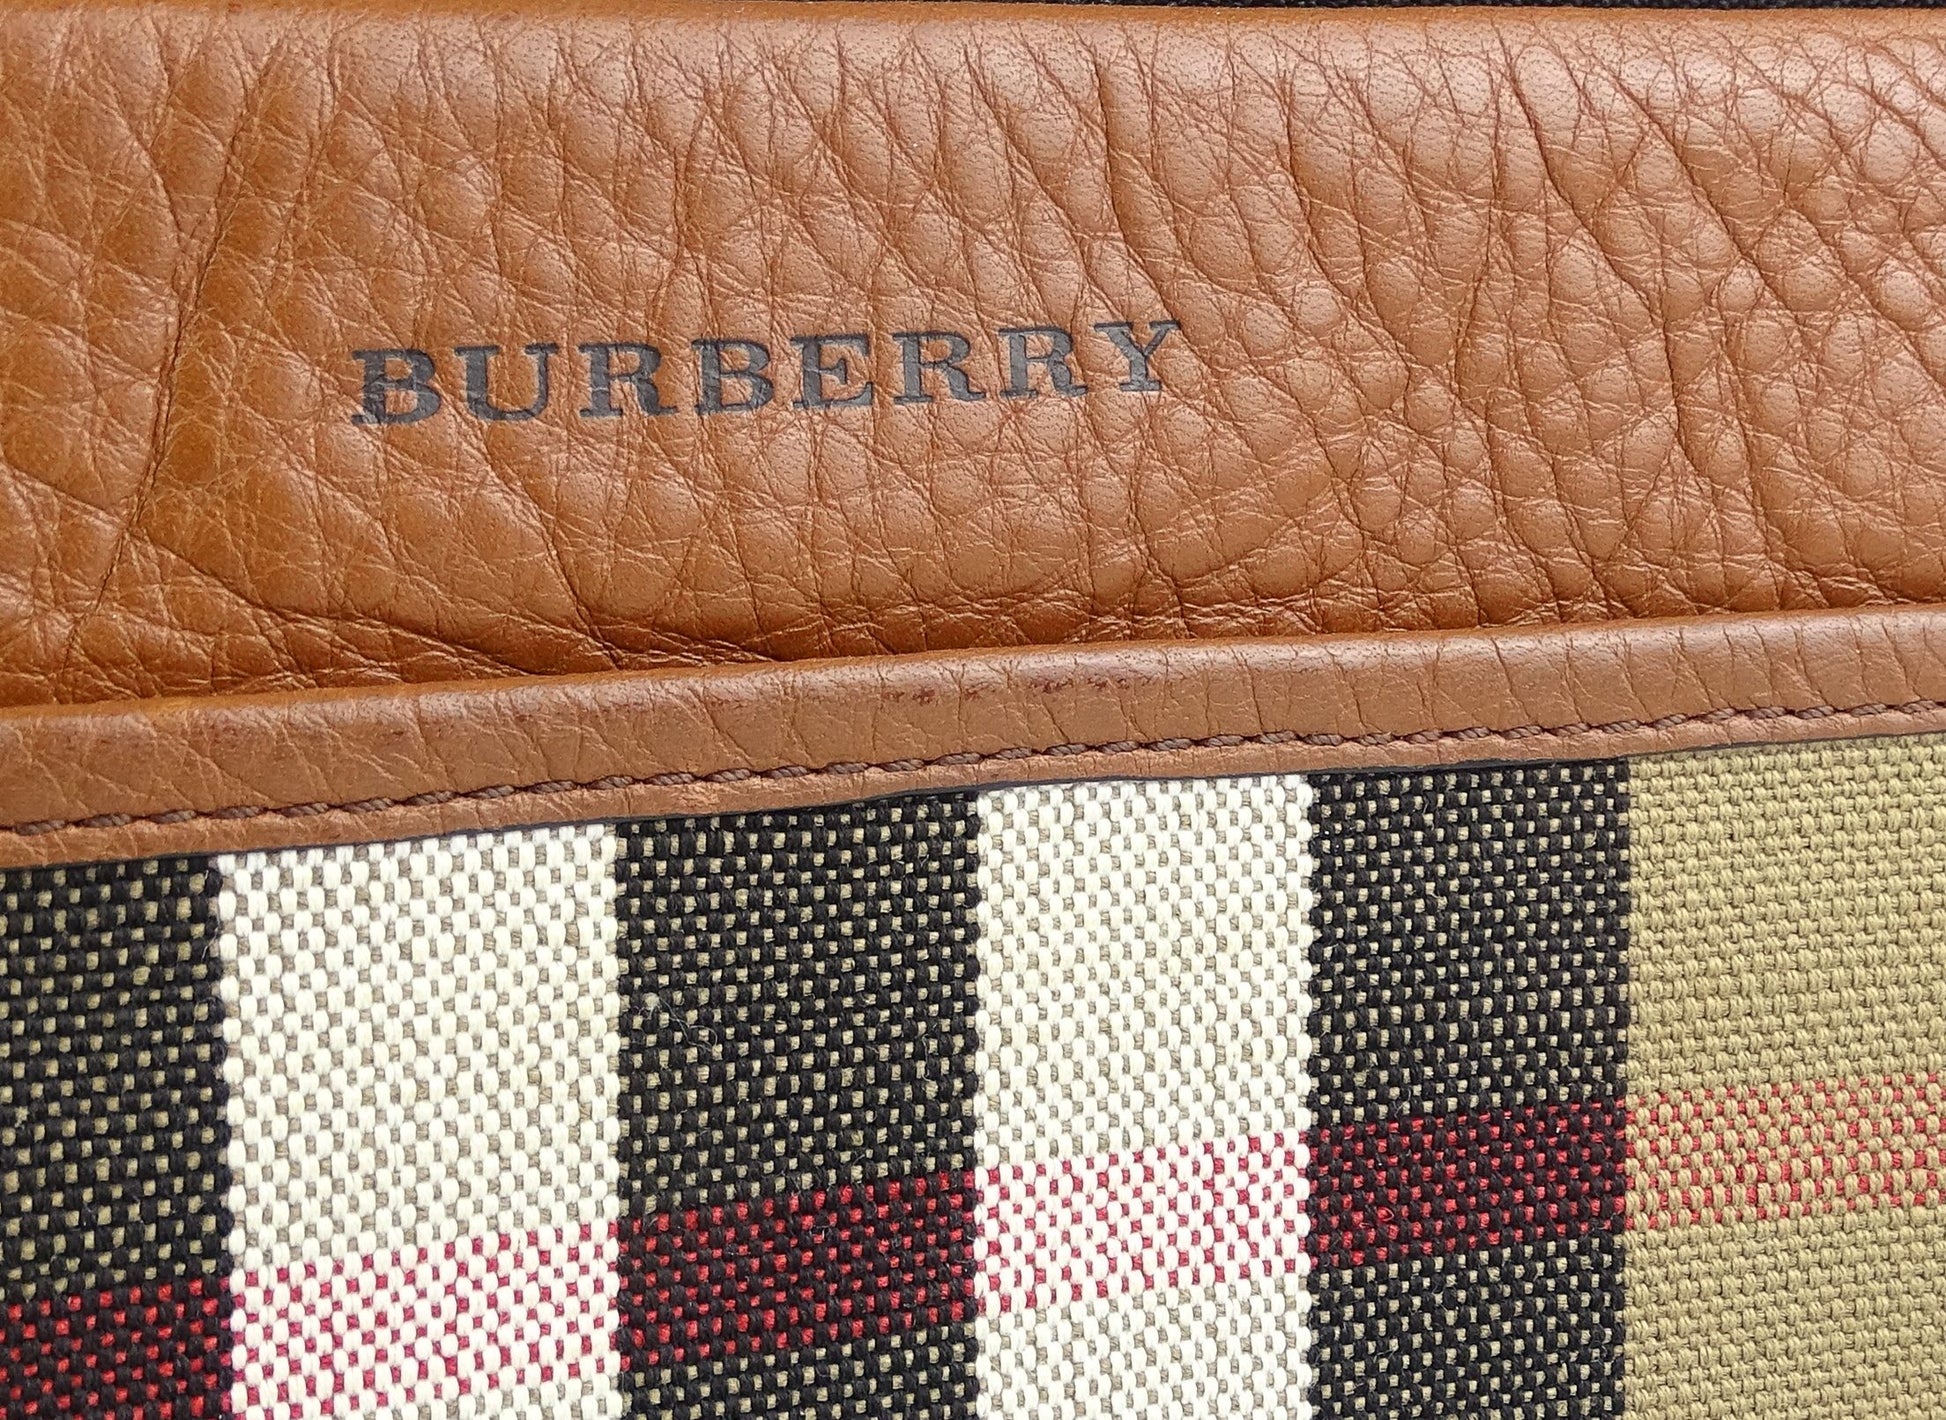 Burberry Zipped Pouch Canvas & Leather Bags Burberry 